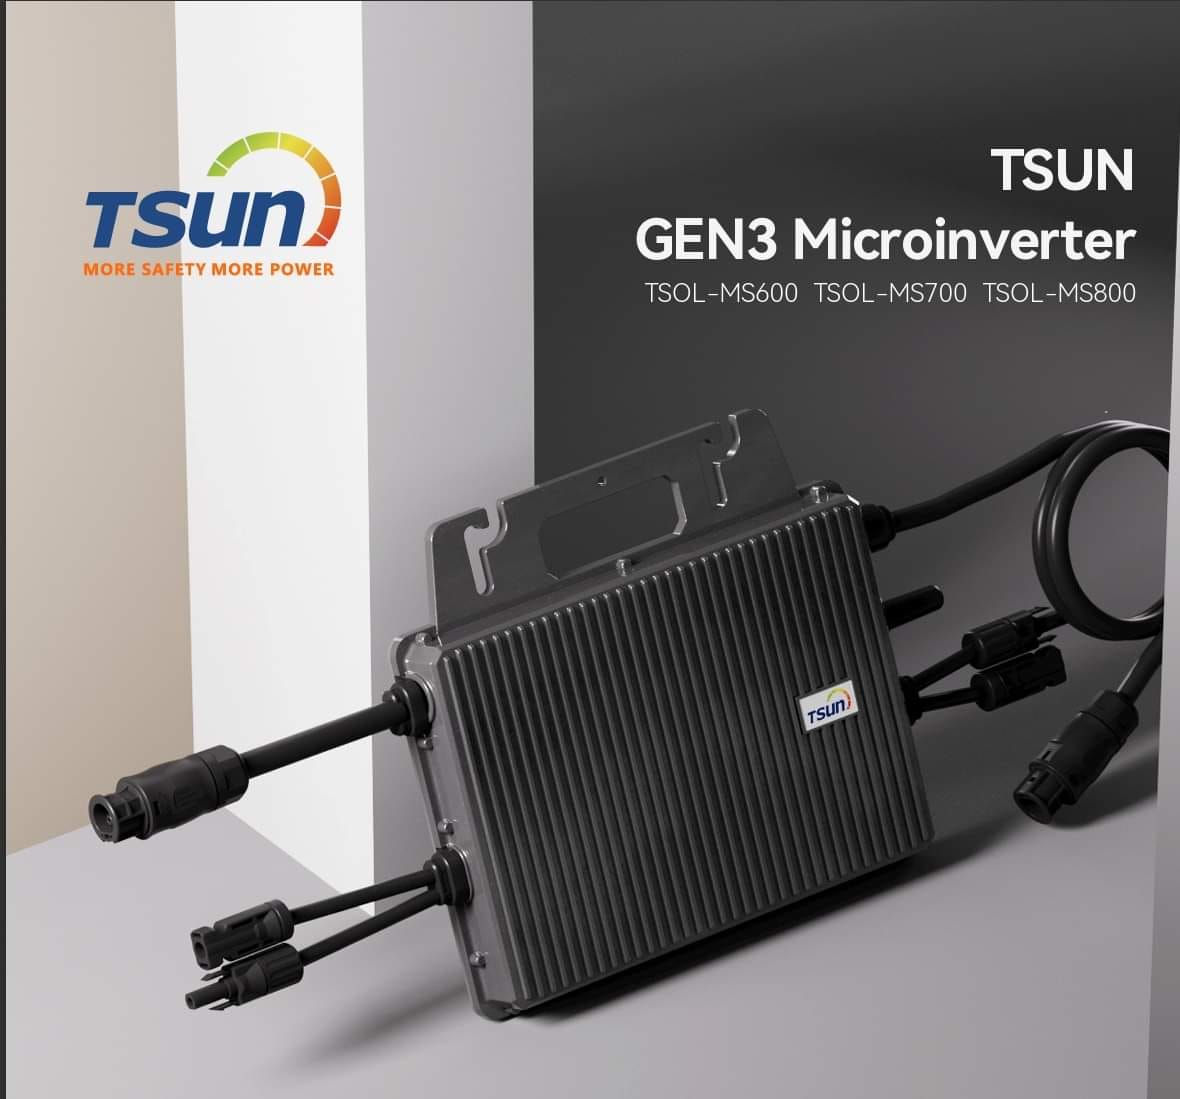 Level up your microinverter with TSUN